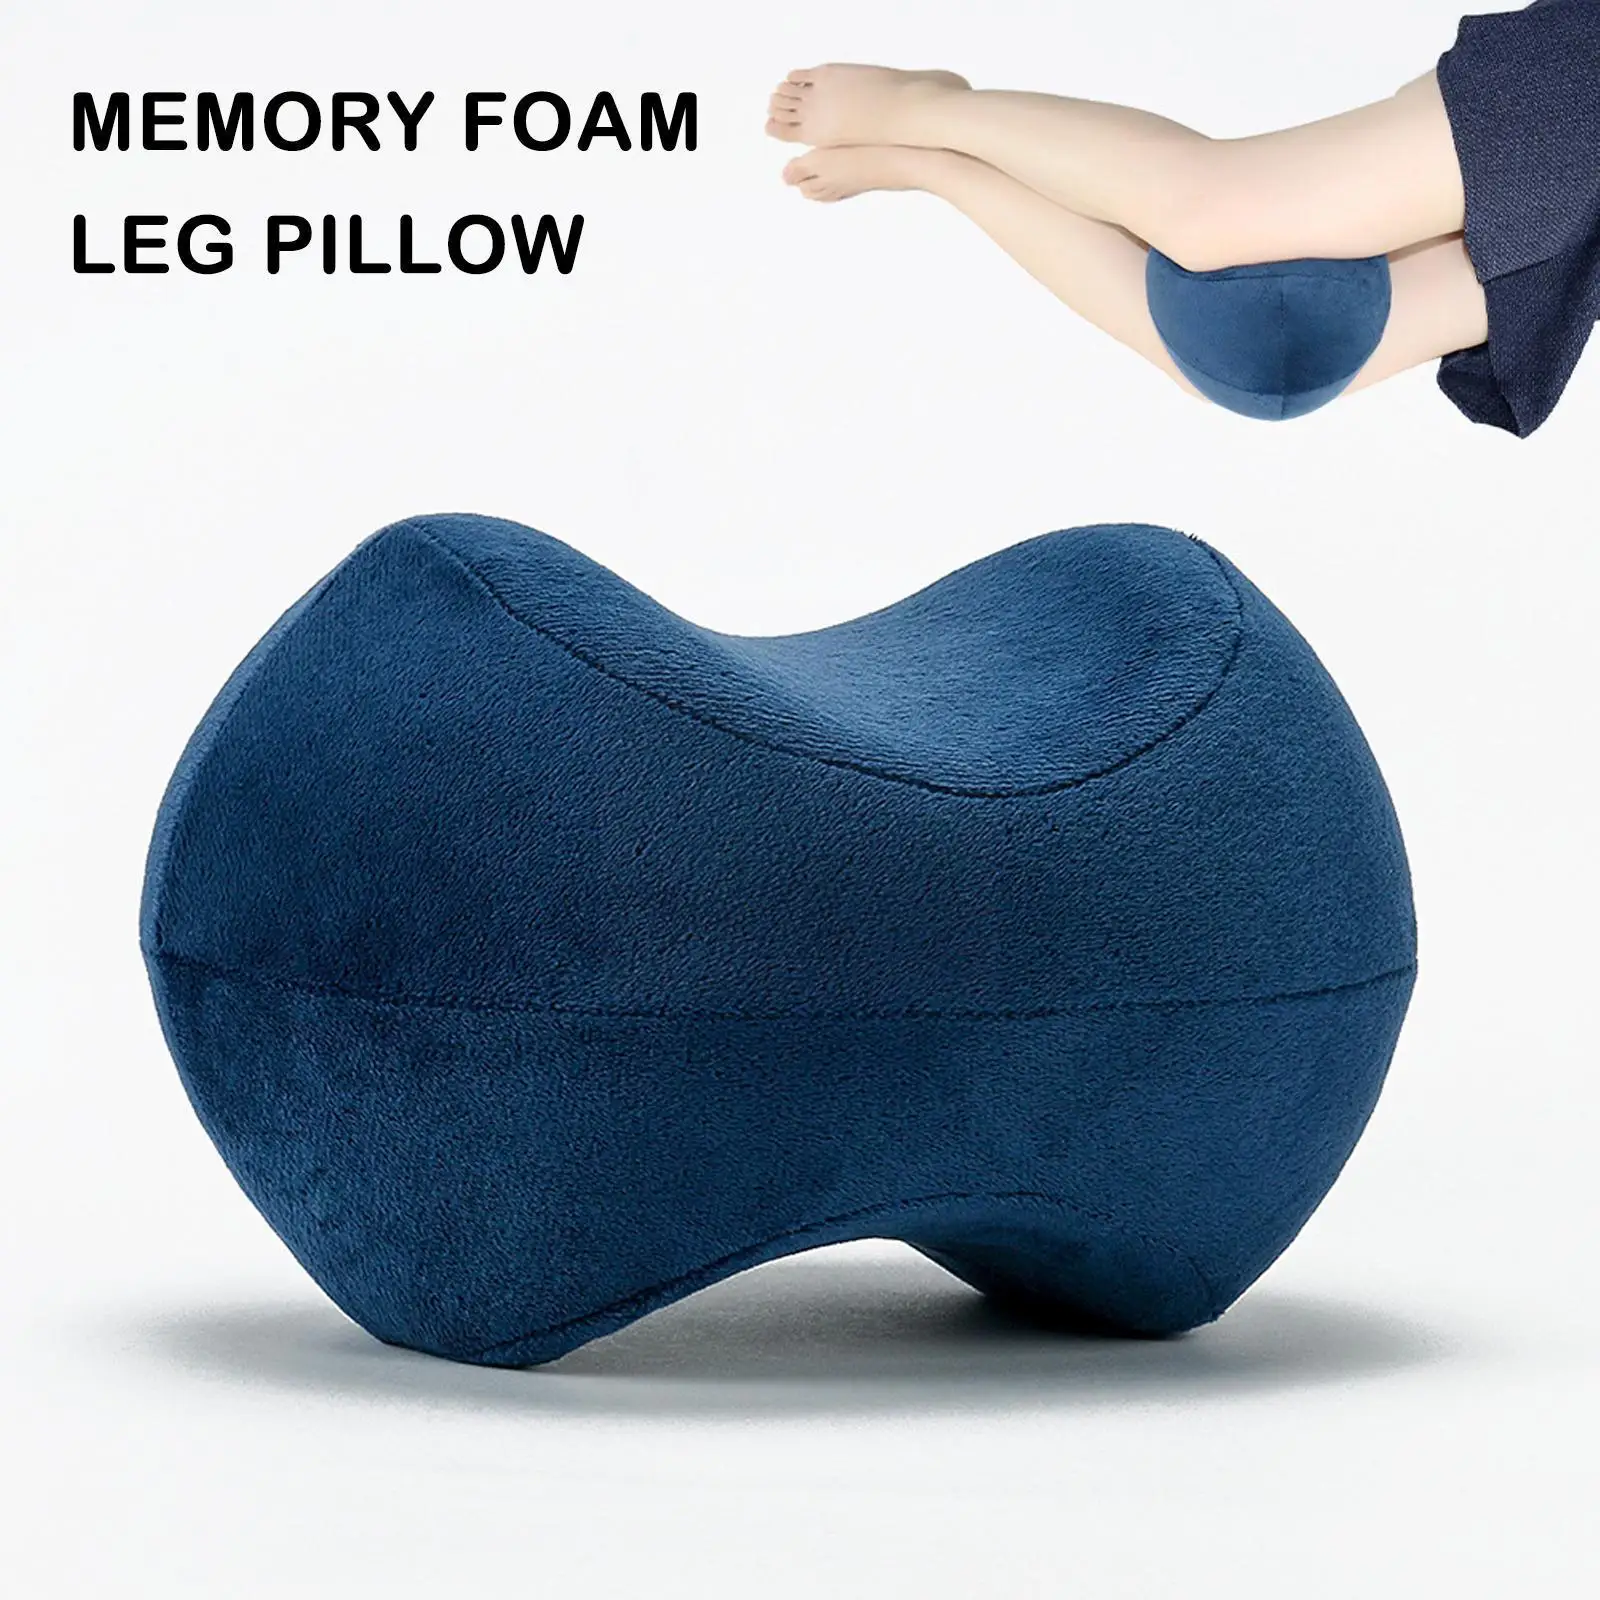 

Orthopedic Pillow for Sleeping Memory Foam Leg Positioner Pillows Knee Support Cushion between the Legs for Hip Pain Sciati X2D4